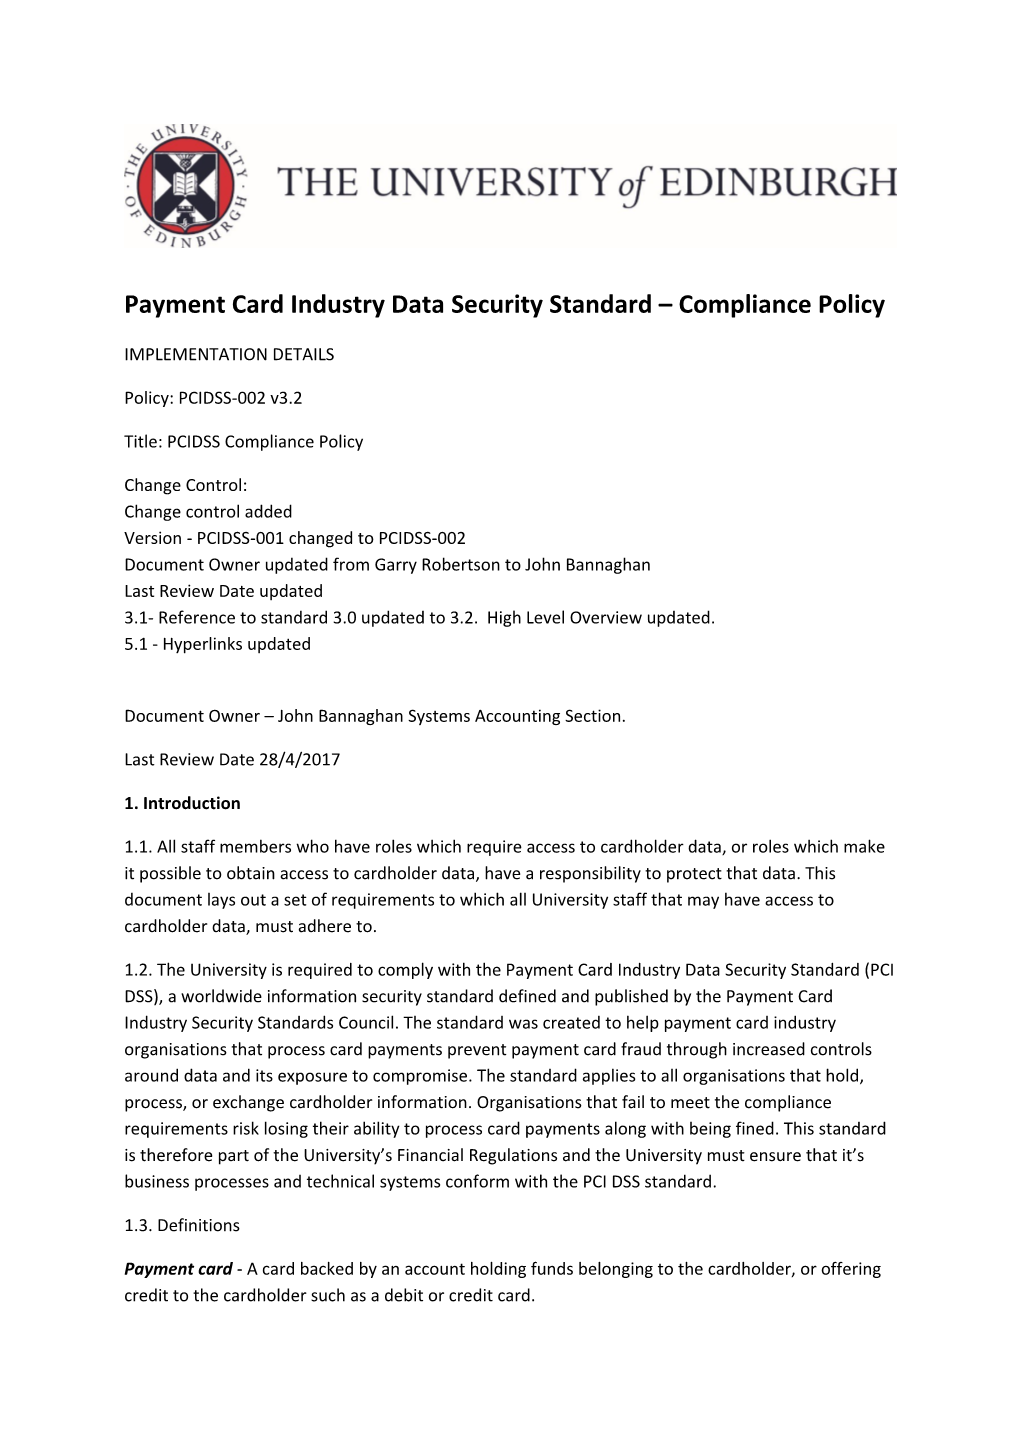 Payment Card Industry Data Security Standard Compliance Policy